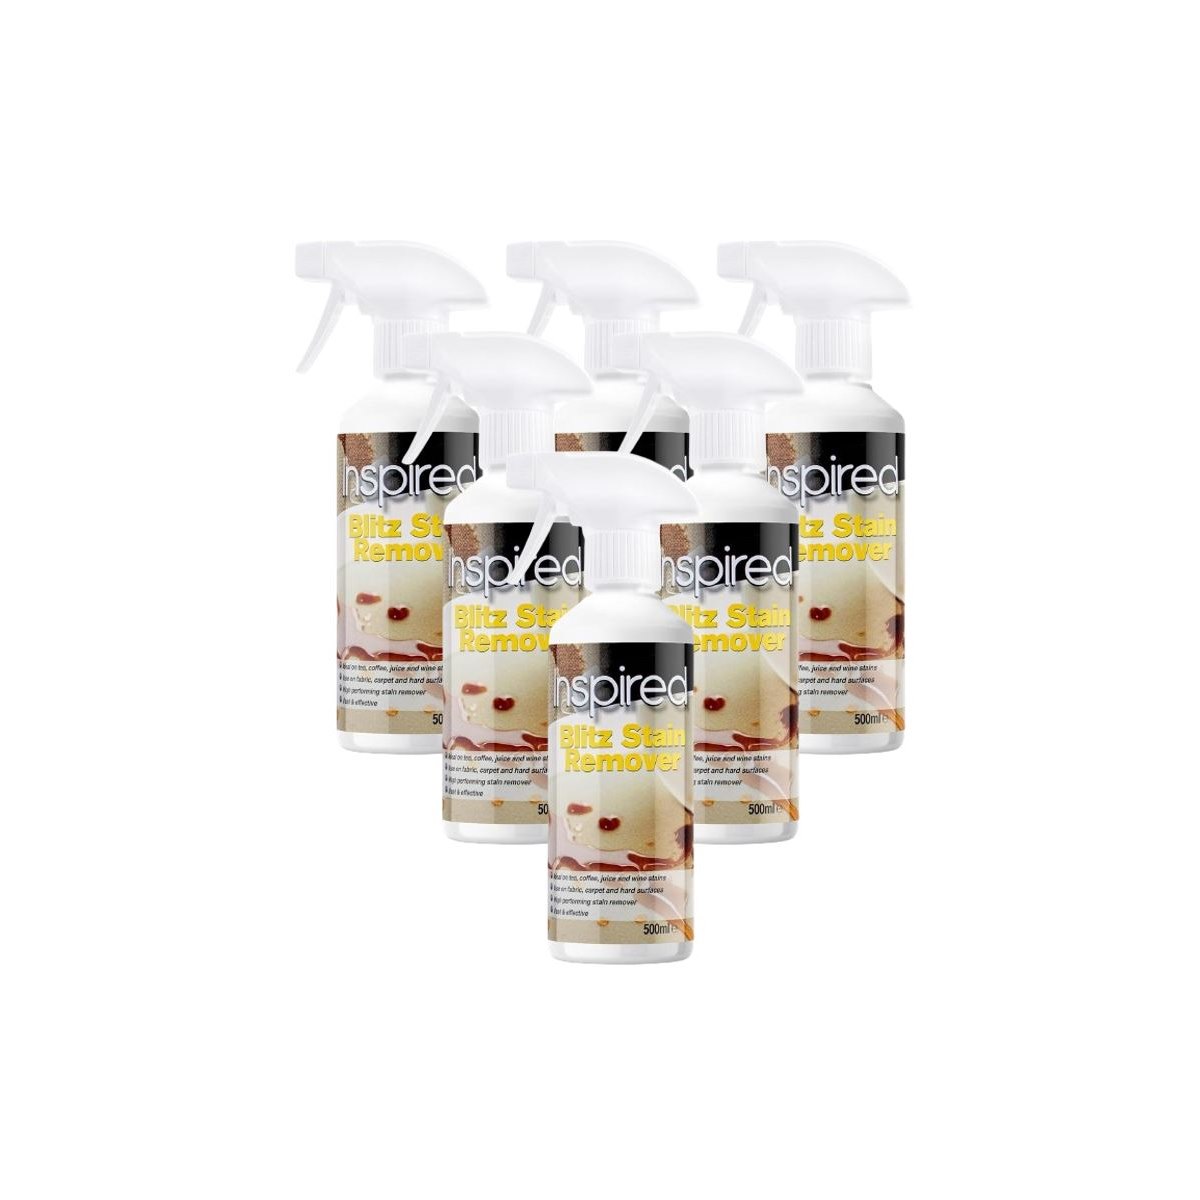 Case of 6 x Inspired Blitz Stain Remover